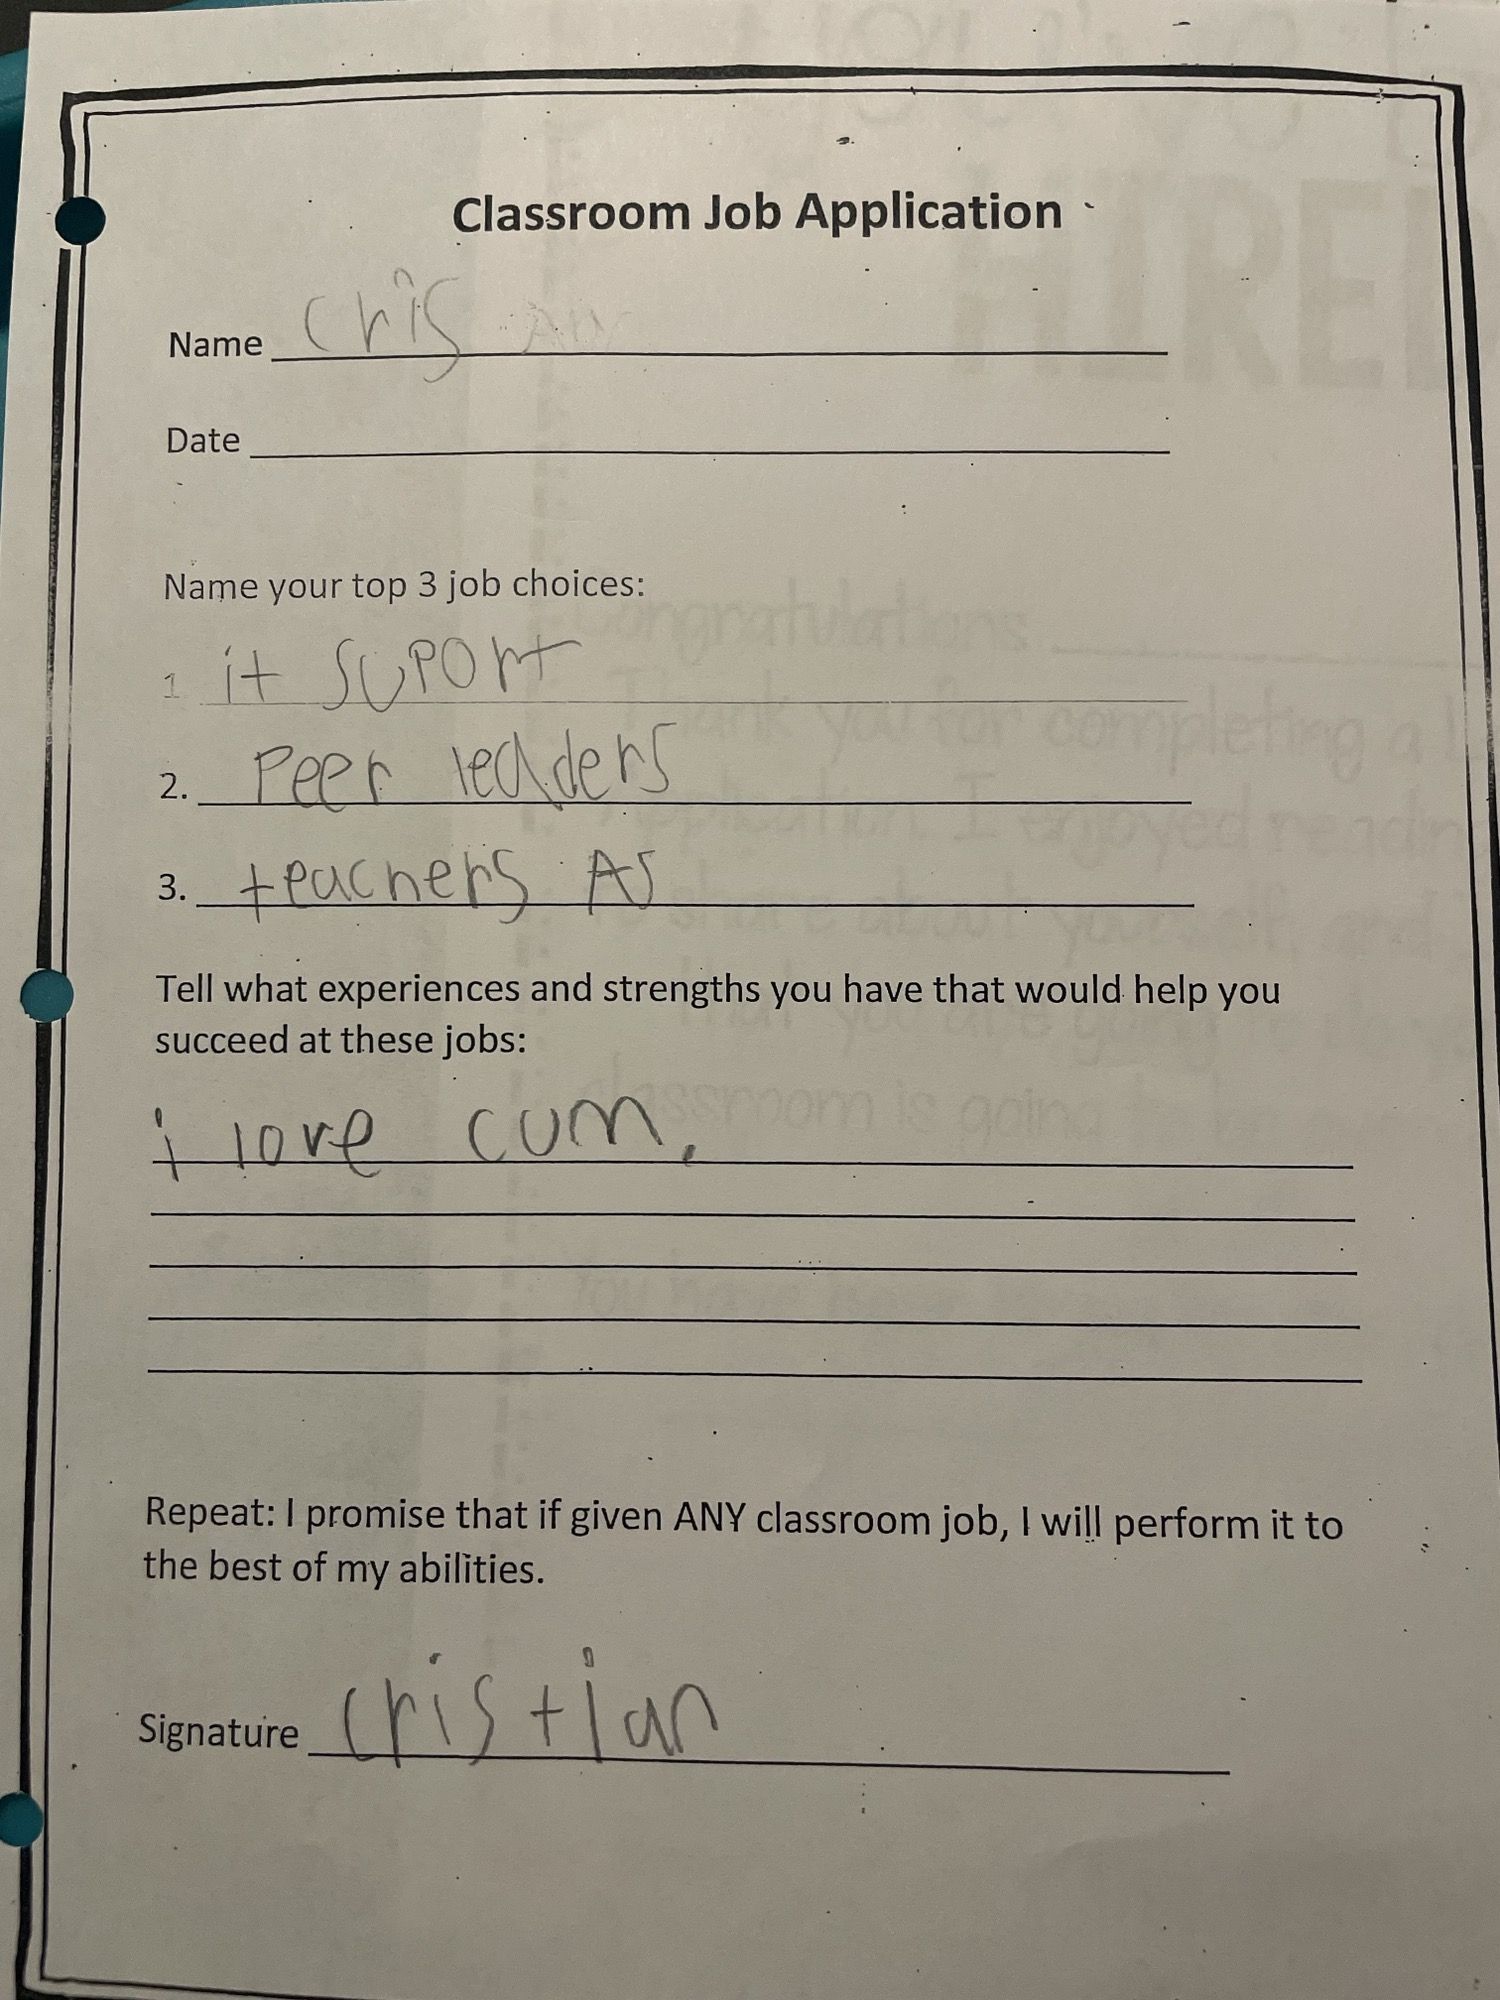 My fiancée is a 2nd grade teacher, one of her kids has an interesting reason why he’ll land his future job…